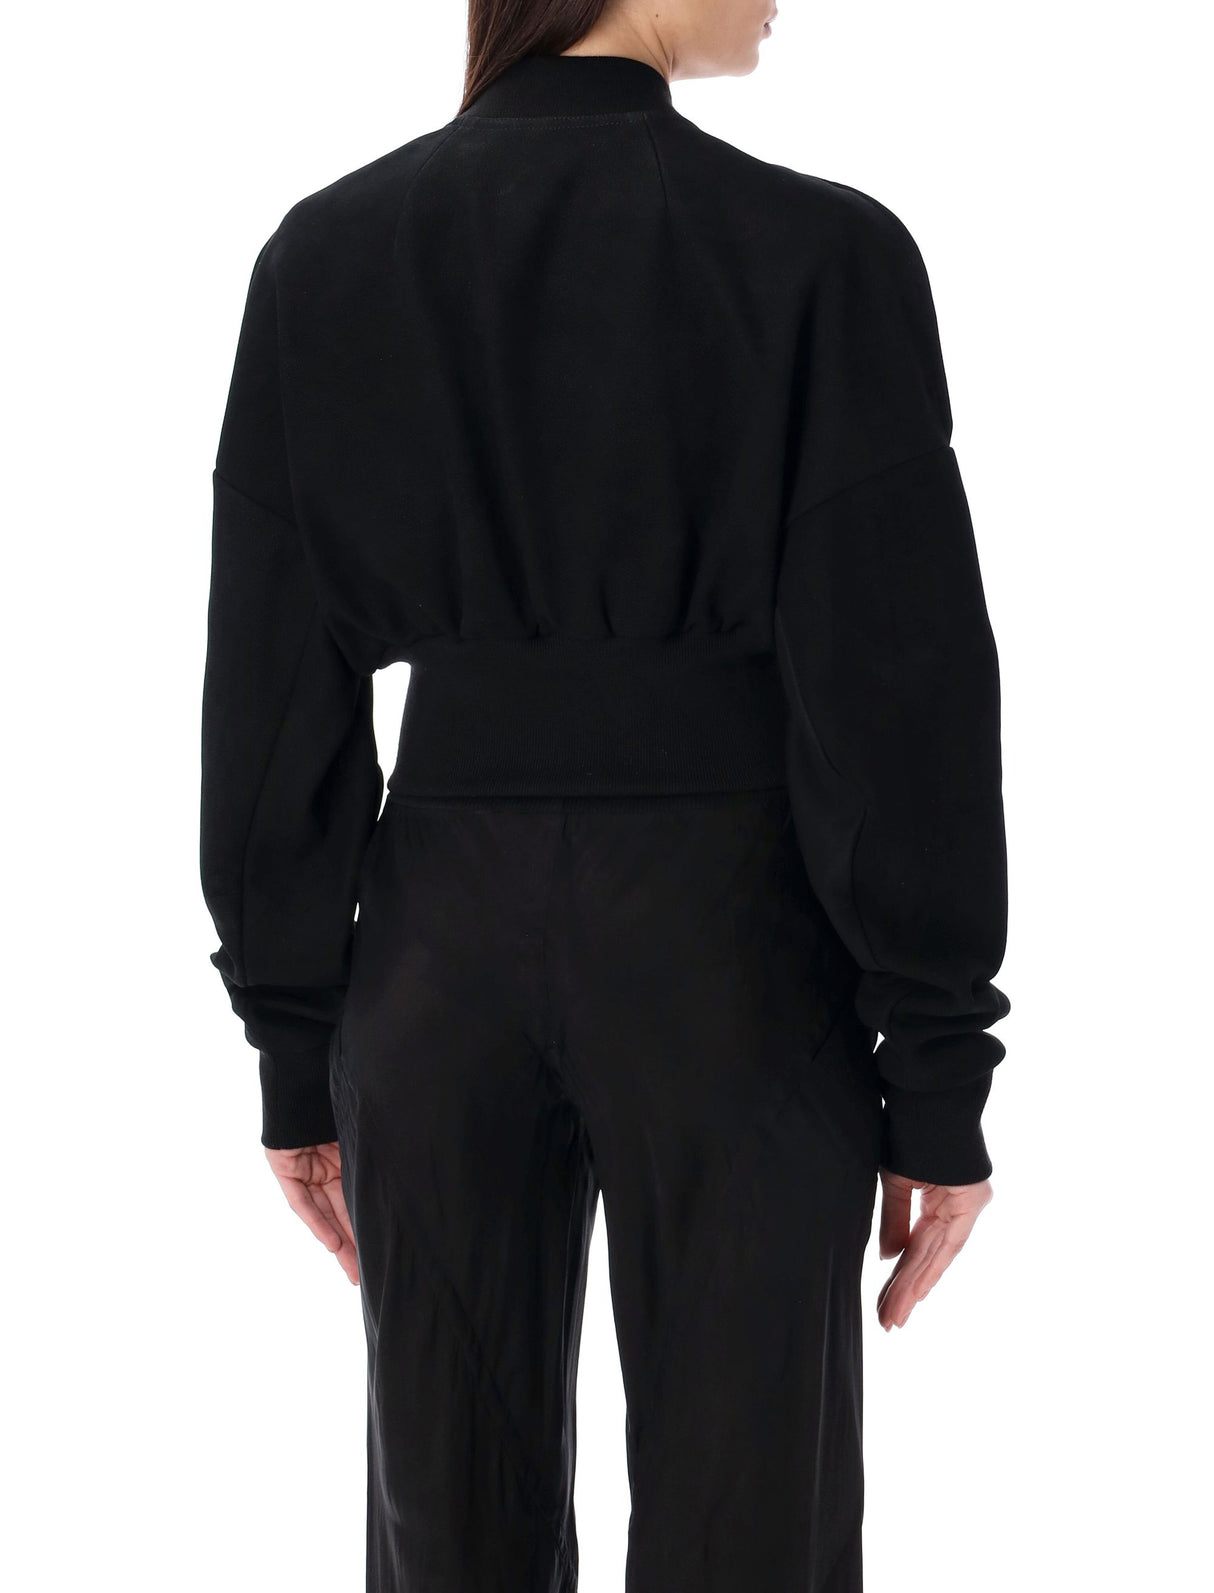 RICK OWENS Women's Black Cropped Leather Jacket with Zip Fastening, Ribbed Collar and Cuffs - SS24